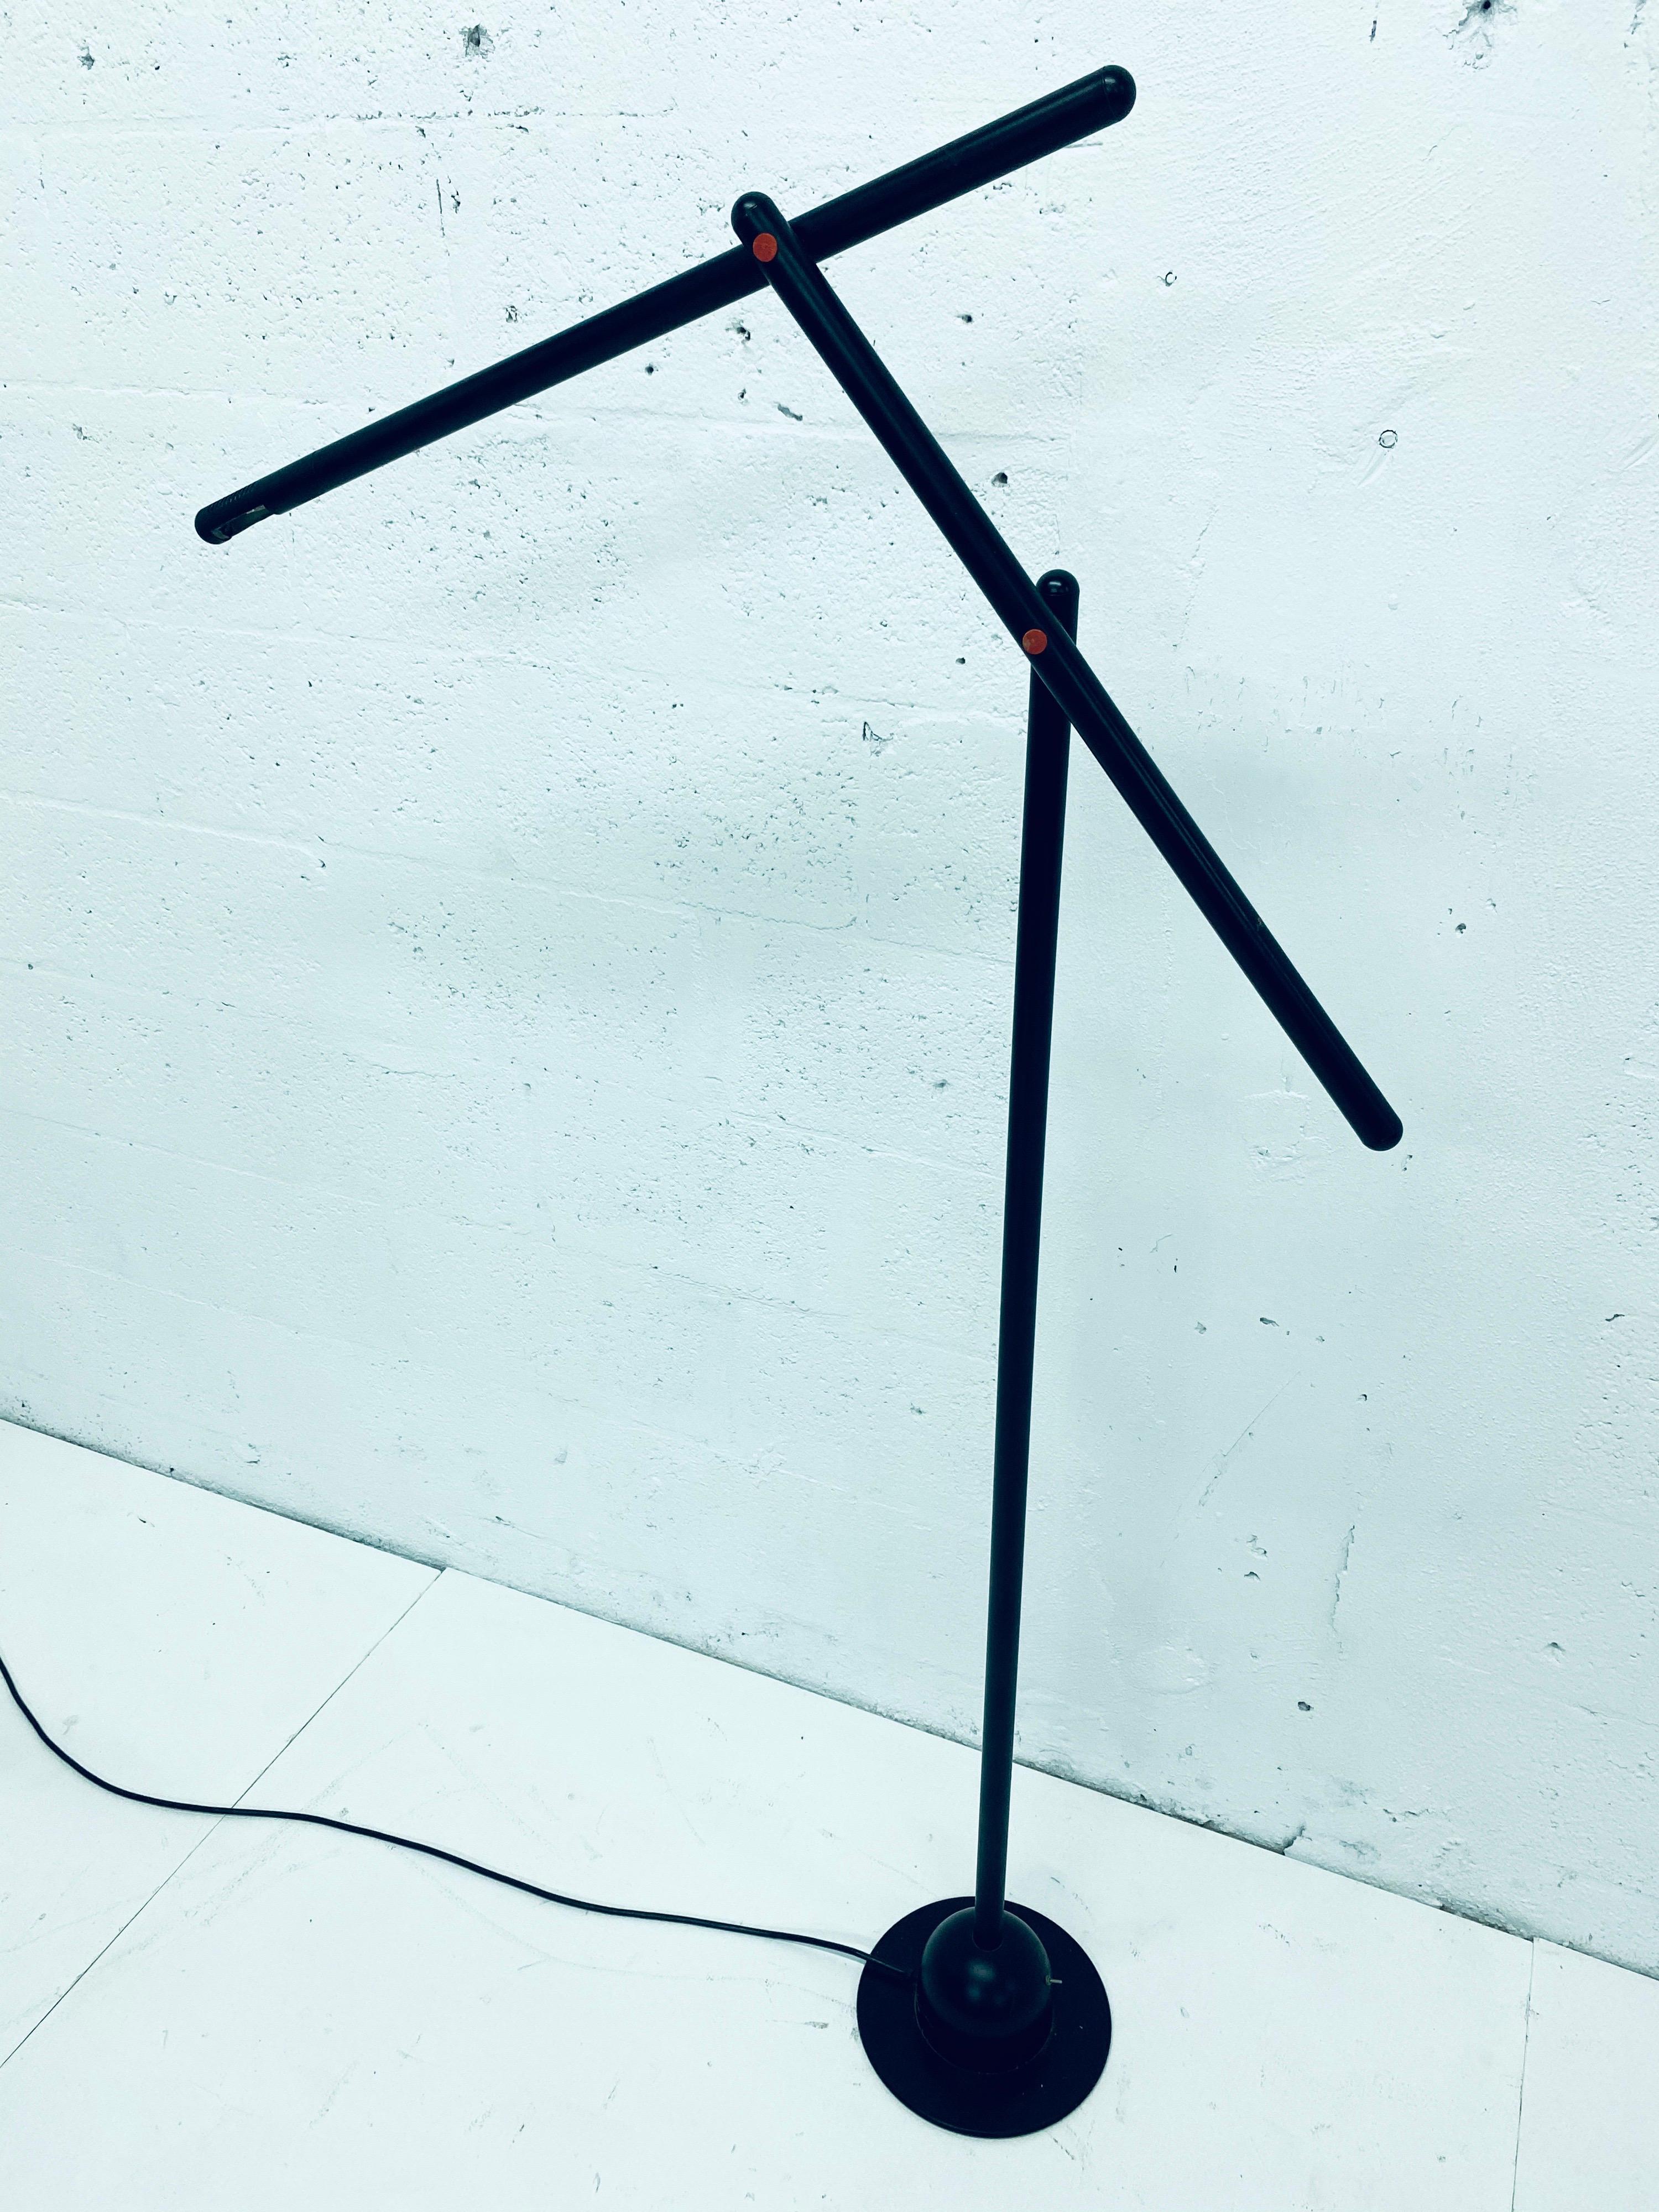 Rare “Mira” black painted aluminum with red accent floor lamp designed by Mario Arnaboldi for Programmaluce, Italy. Toggles between high and low light.